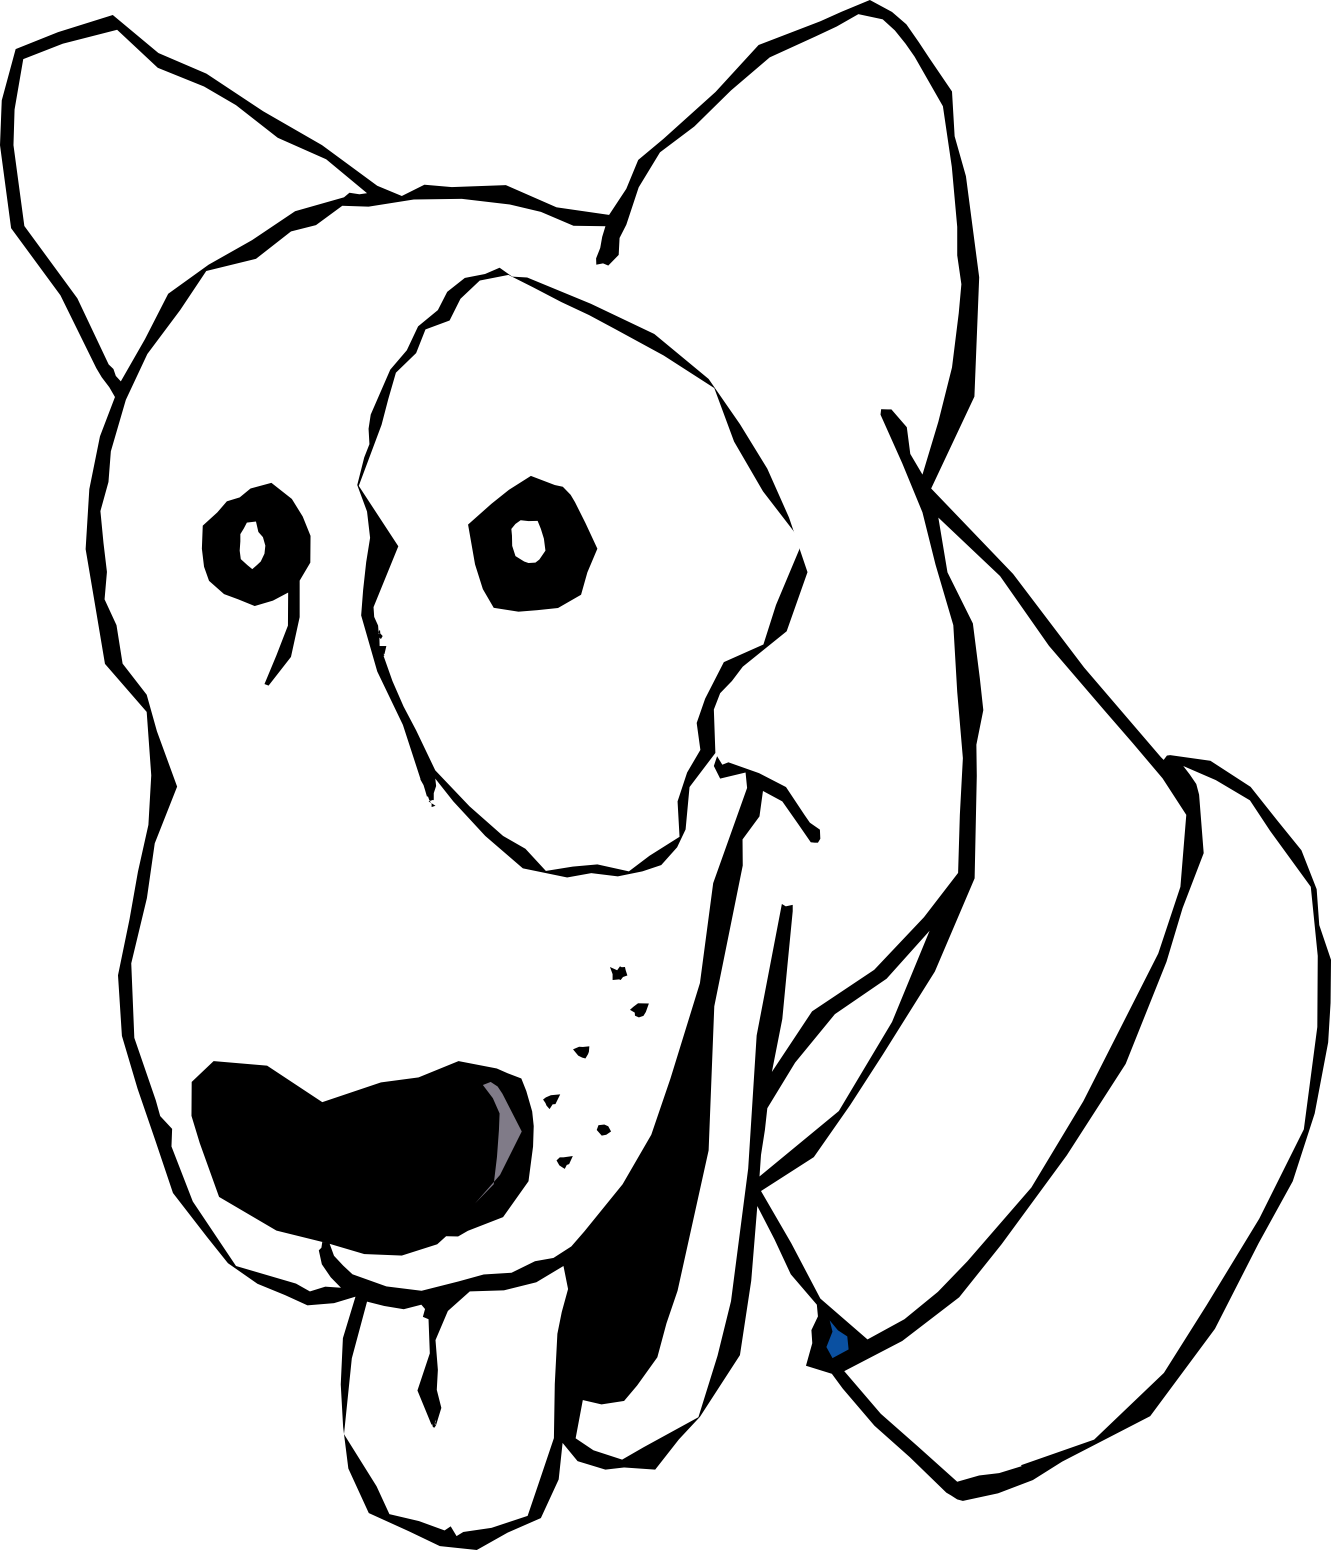 free clipart of dogs black and white - photo #15